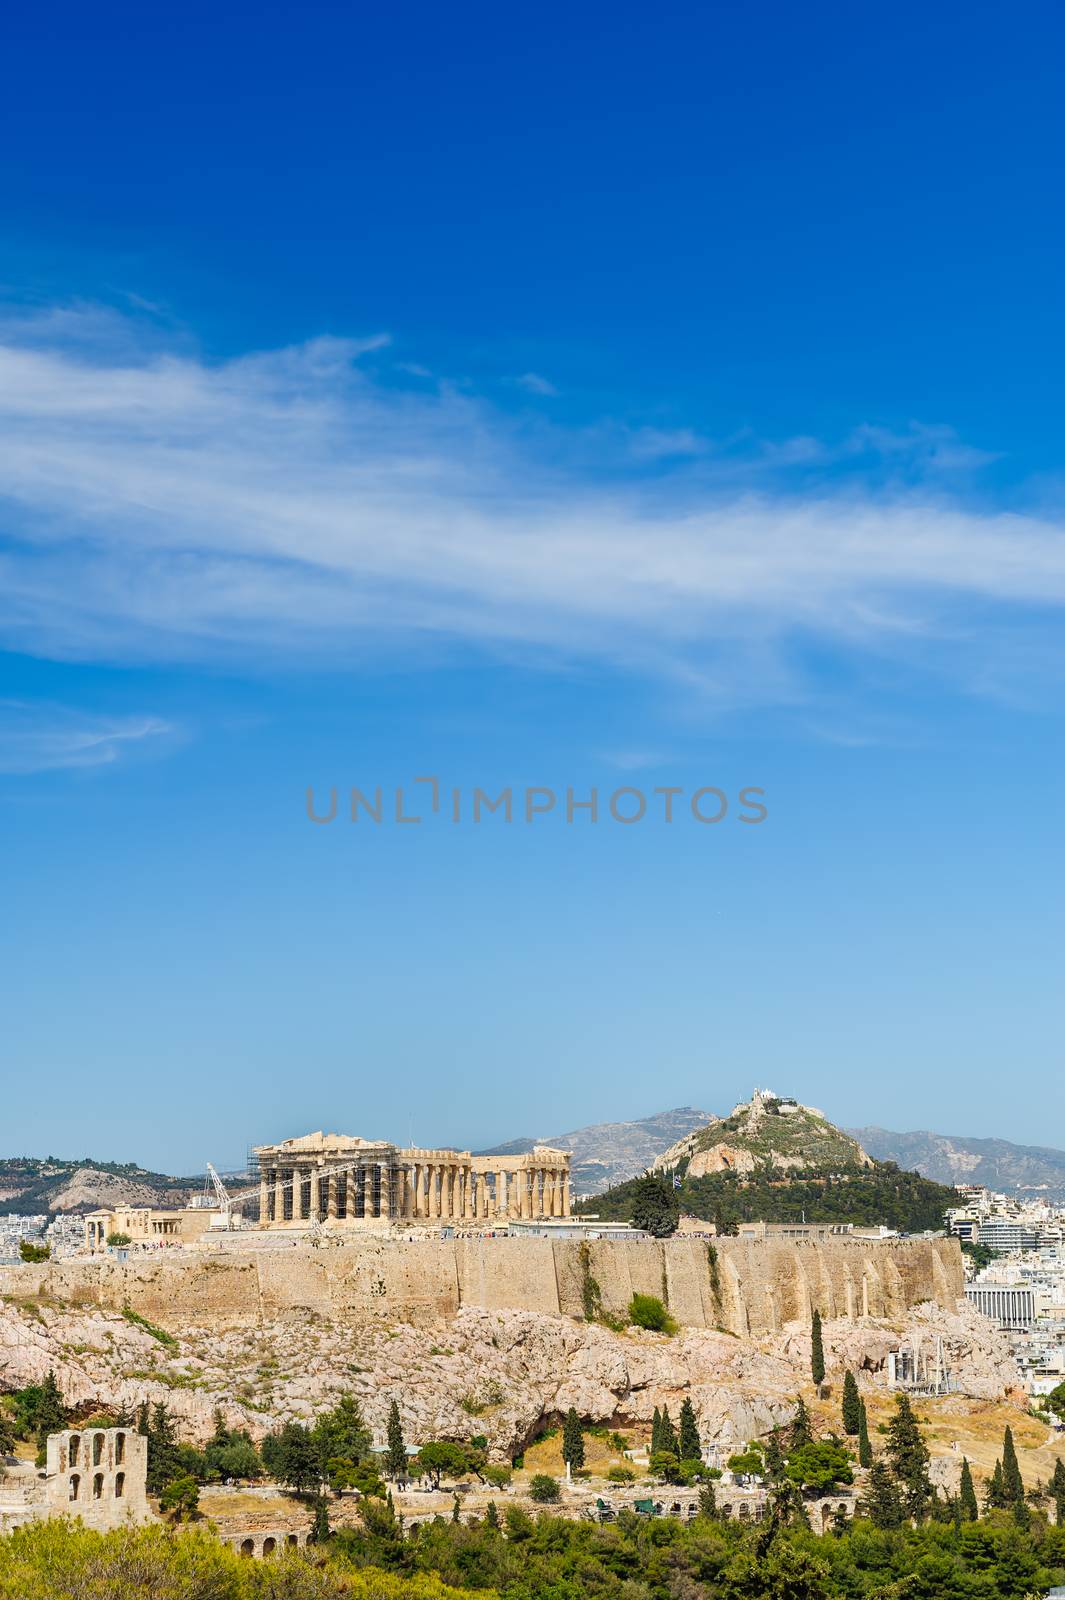 Acropolis in rays of sunset by starush